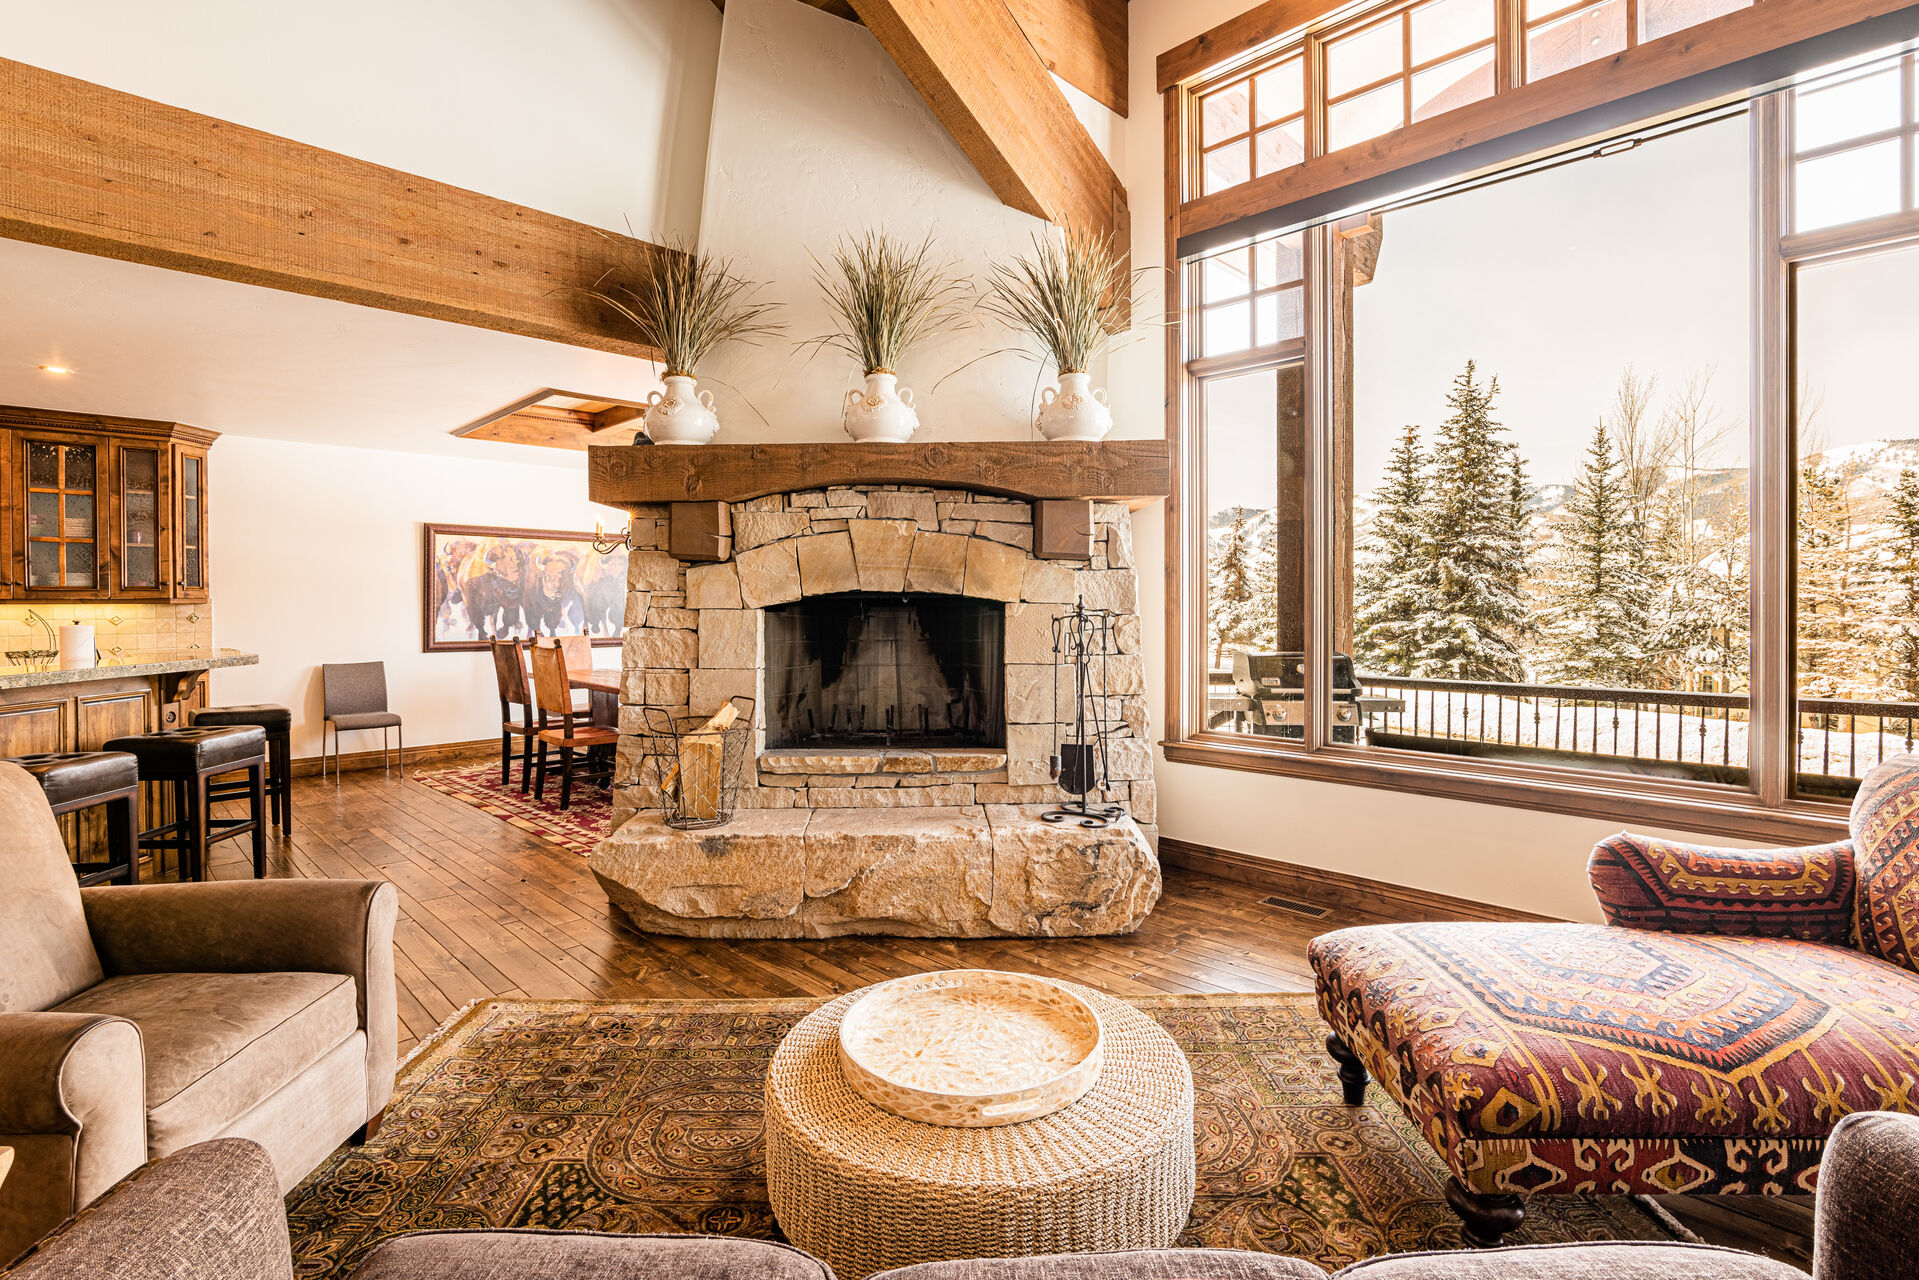 Main Level Living Room with vaulted ceilings, fireplace, and stunning views of the surrounding mountains